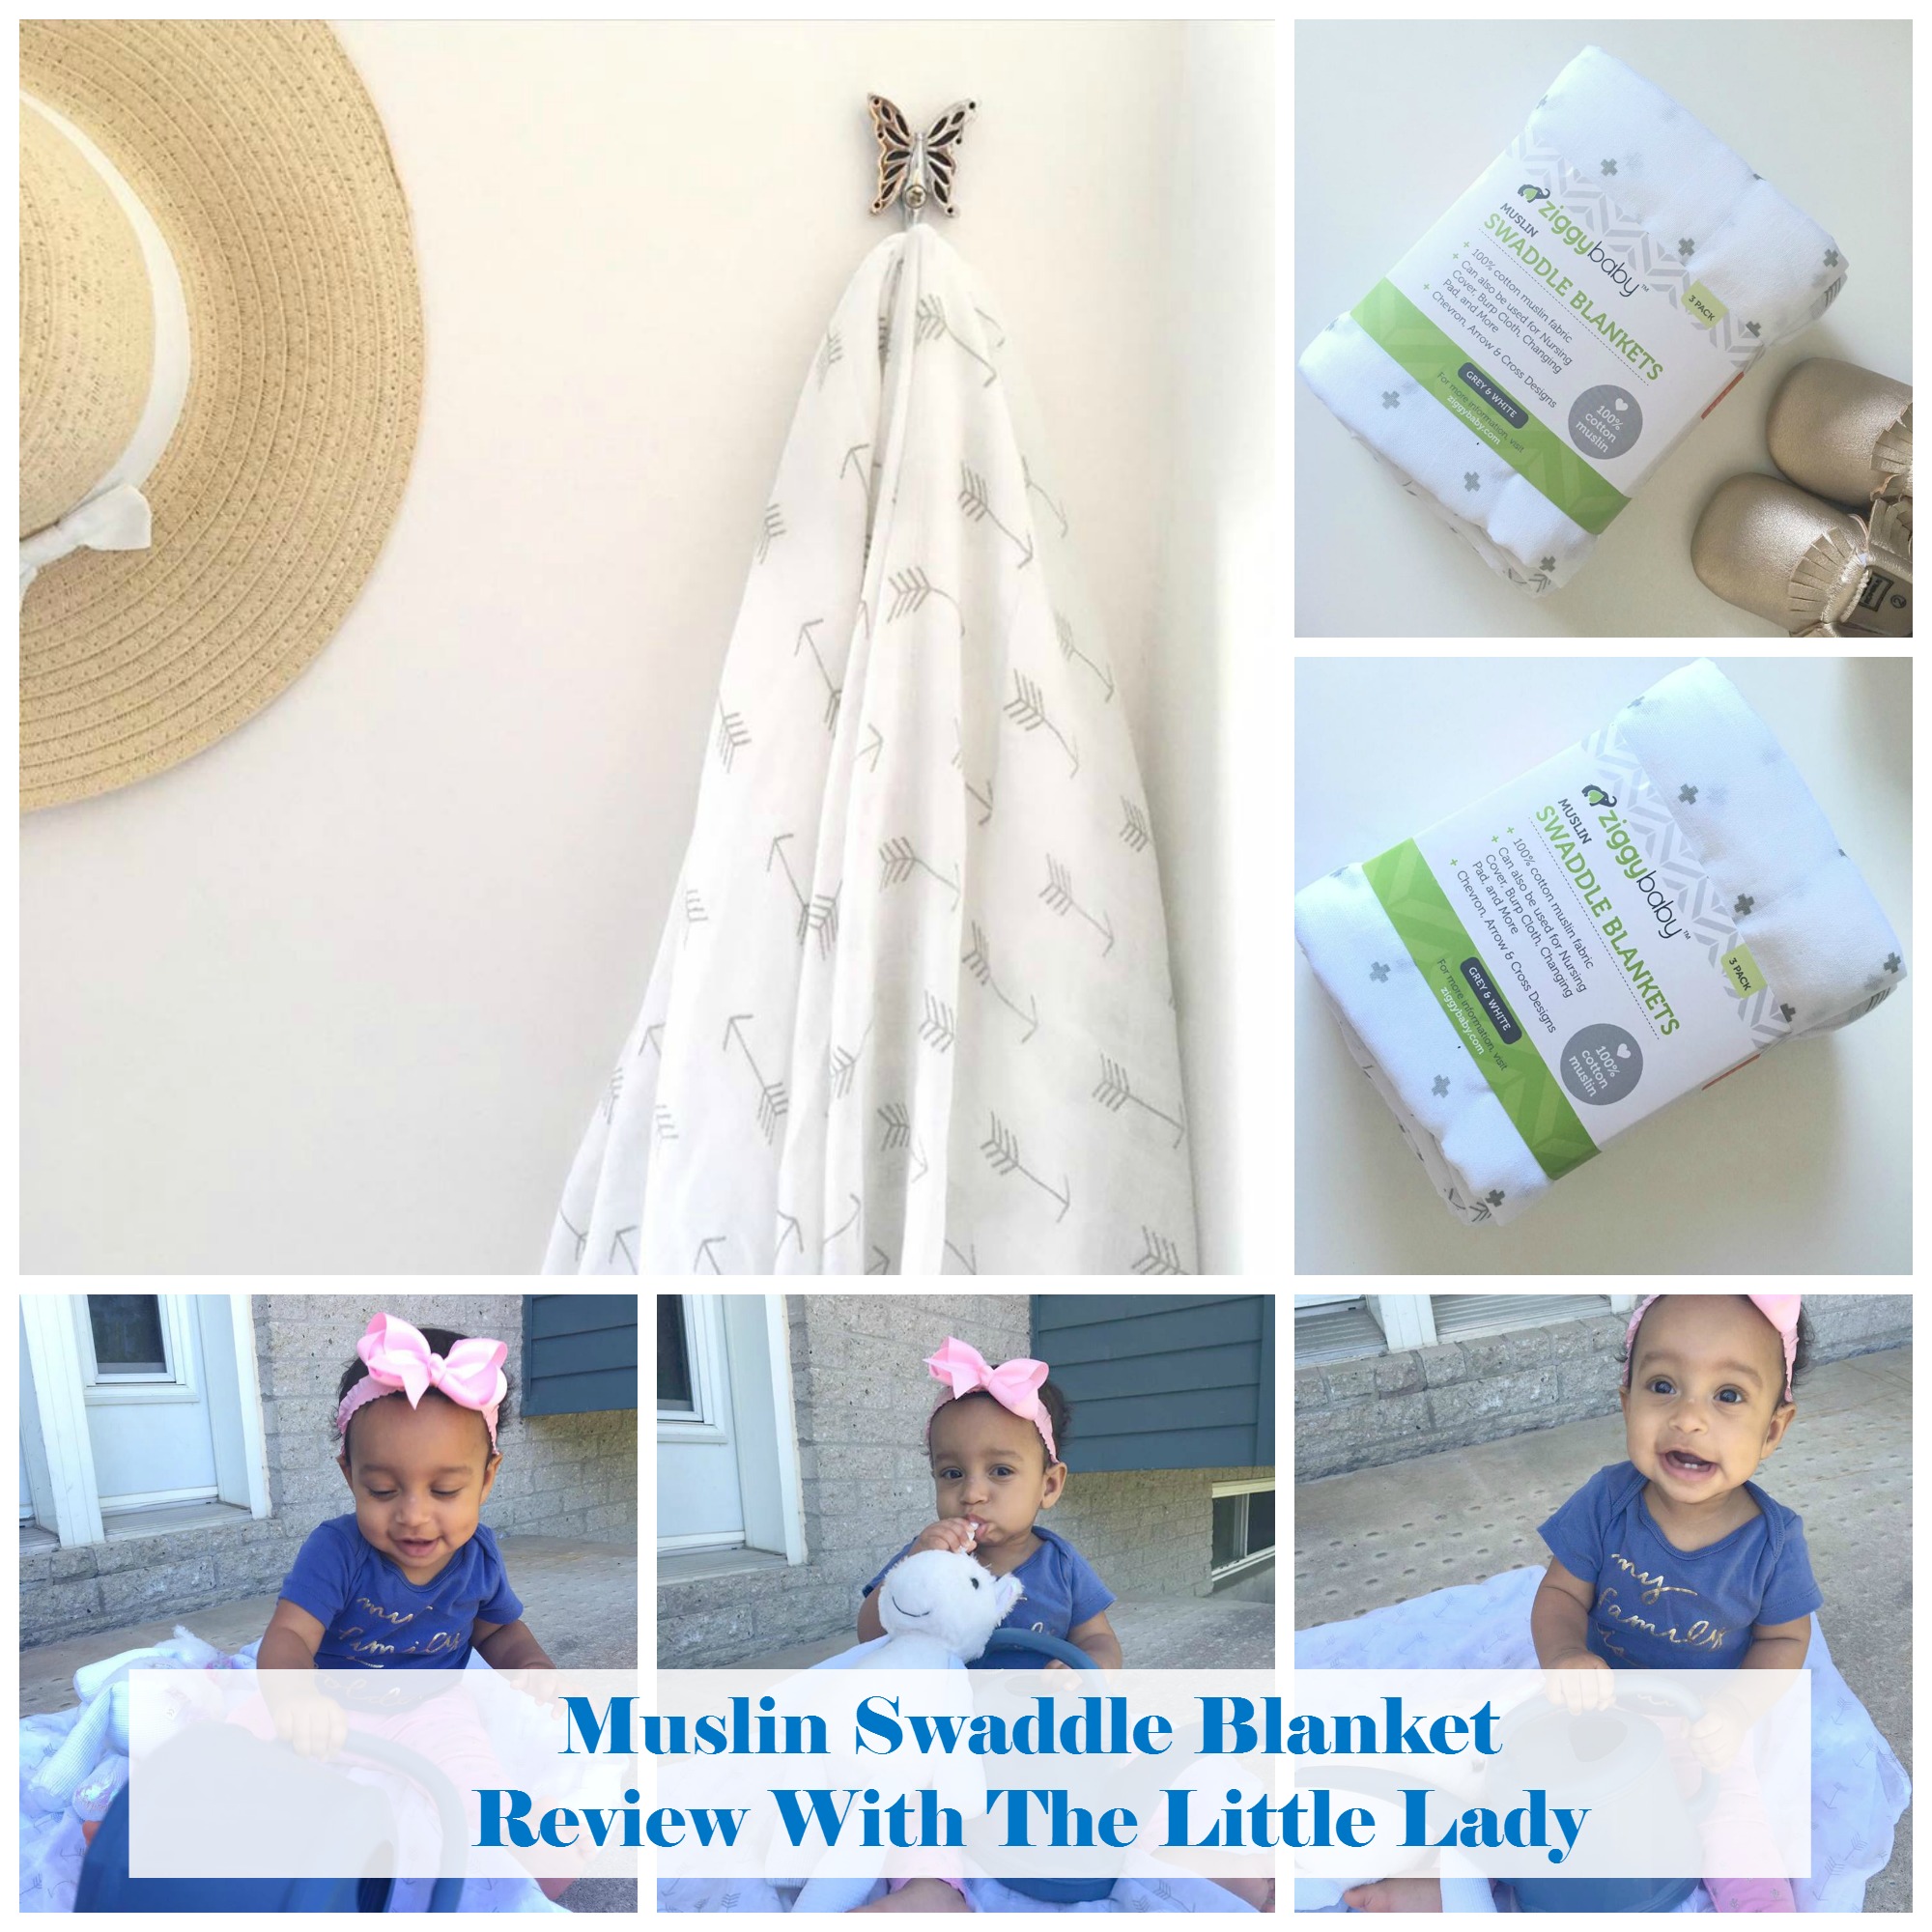 Muslin Swaddle Blanket Review With The Little Lady